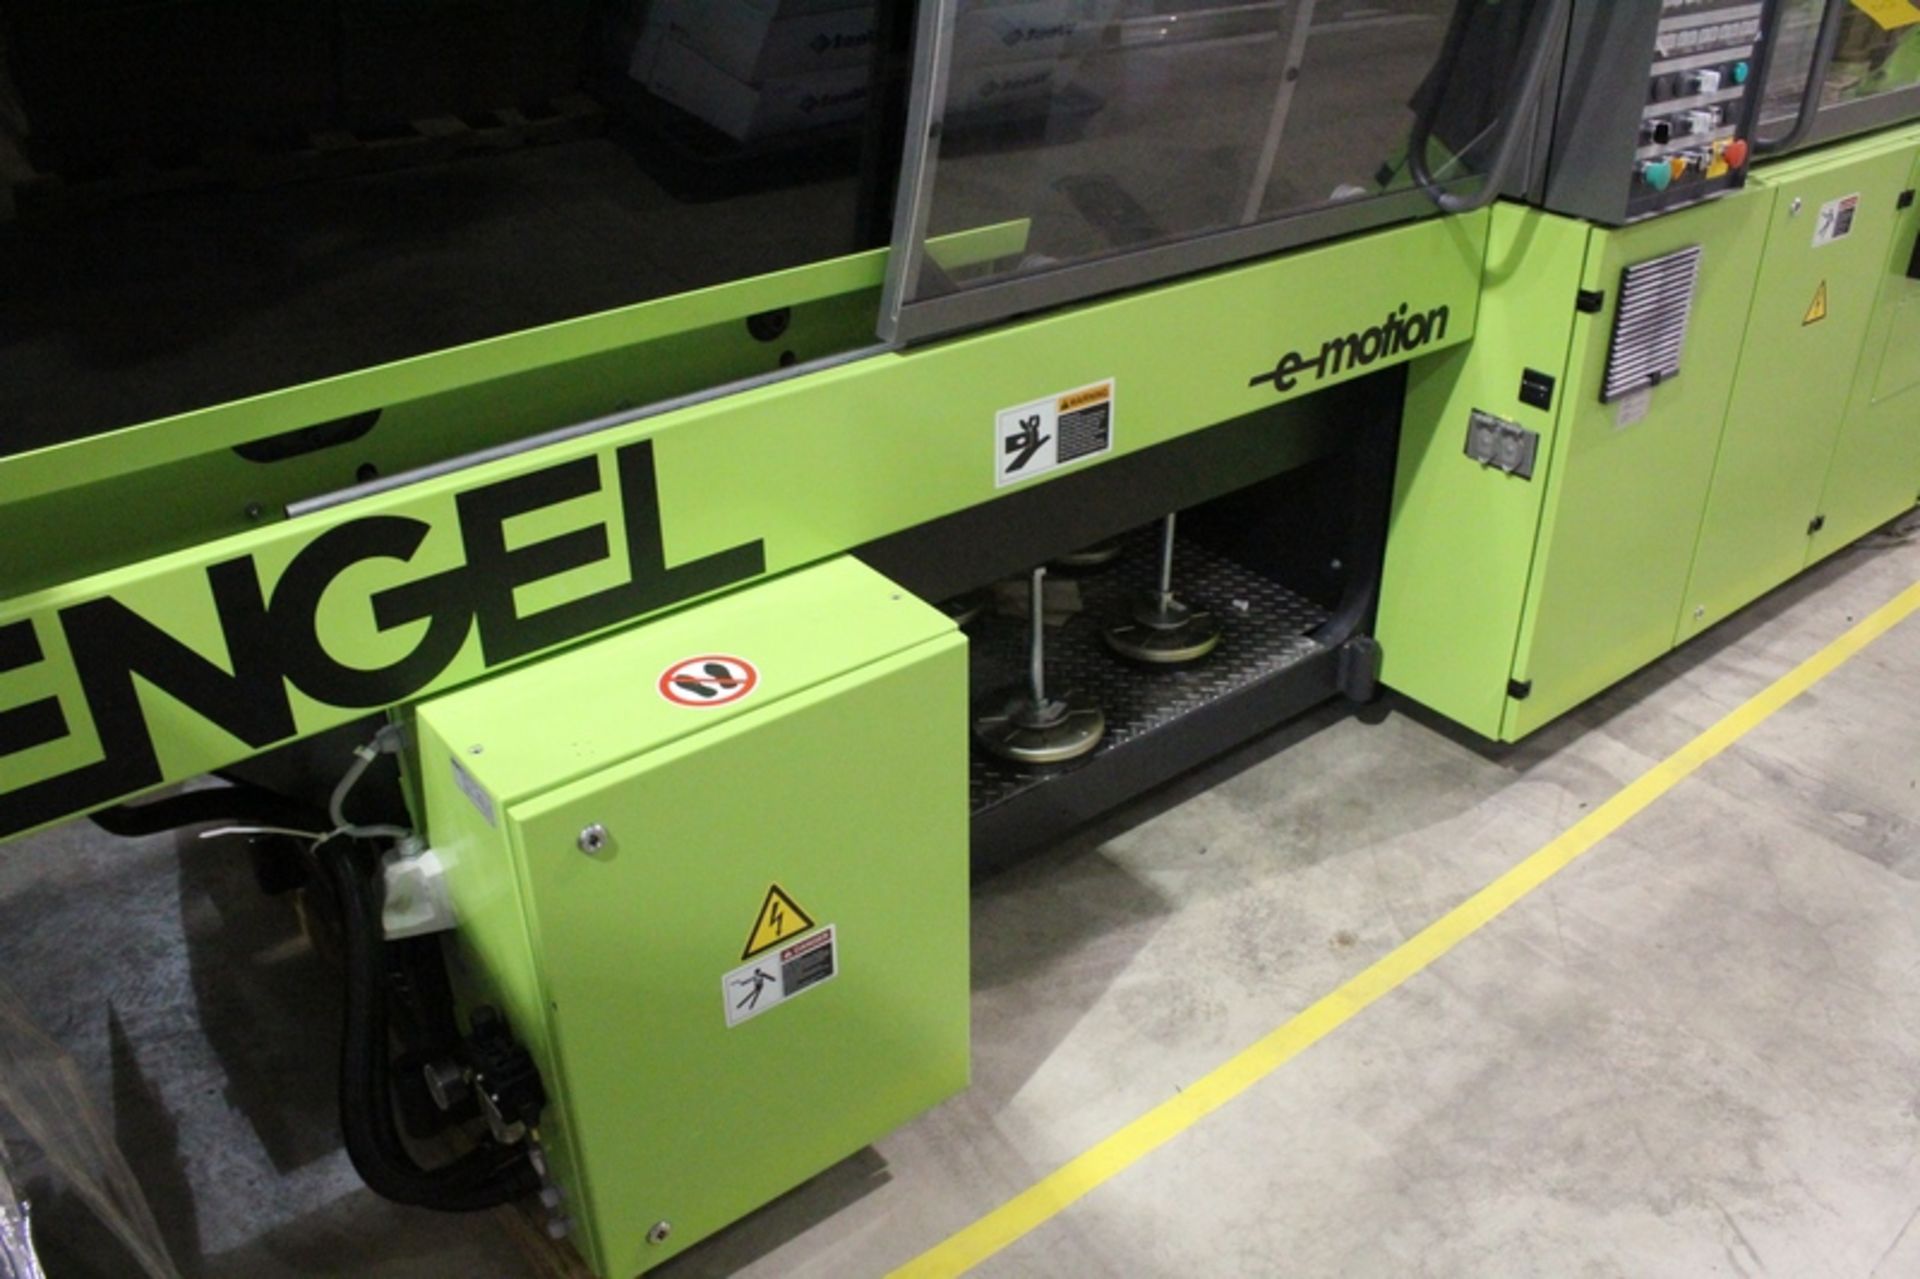 Engel 60 Ton Model E-Motion 80/60 US All Electric Injection Molding Machine, s/n 164965 (new - Image 4 of 10